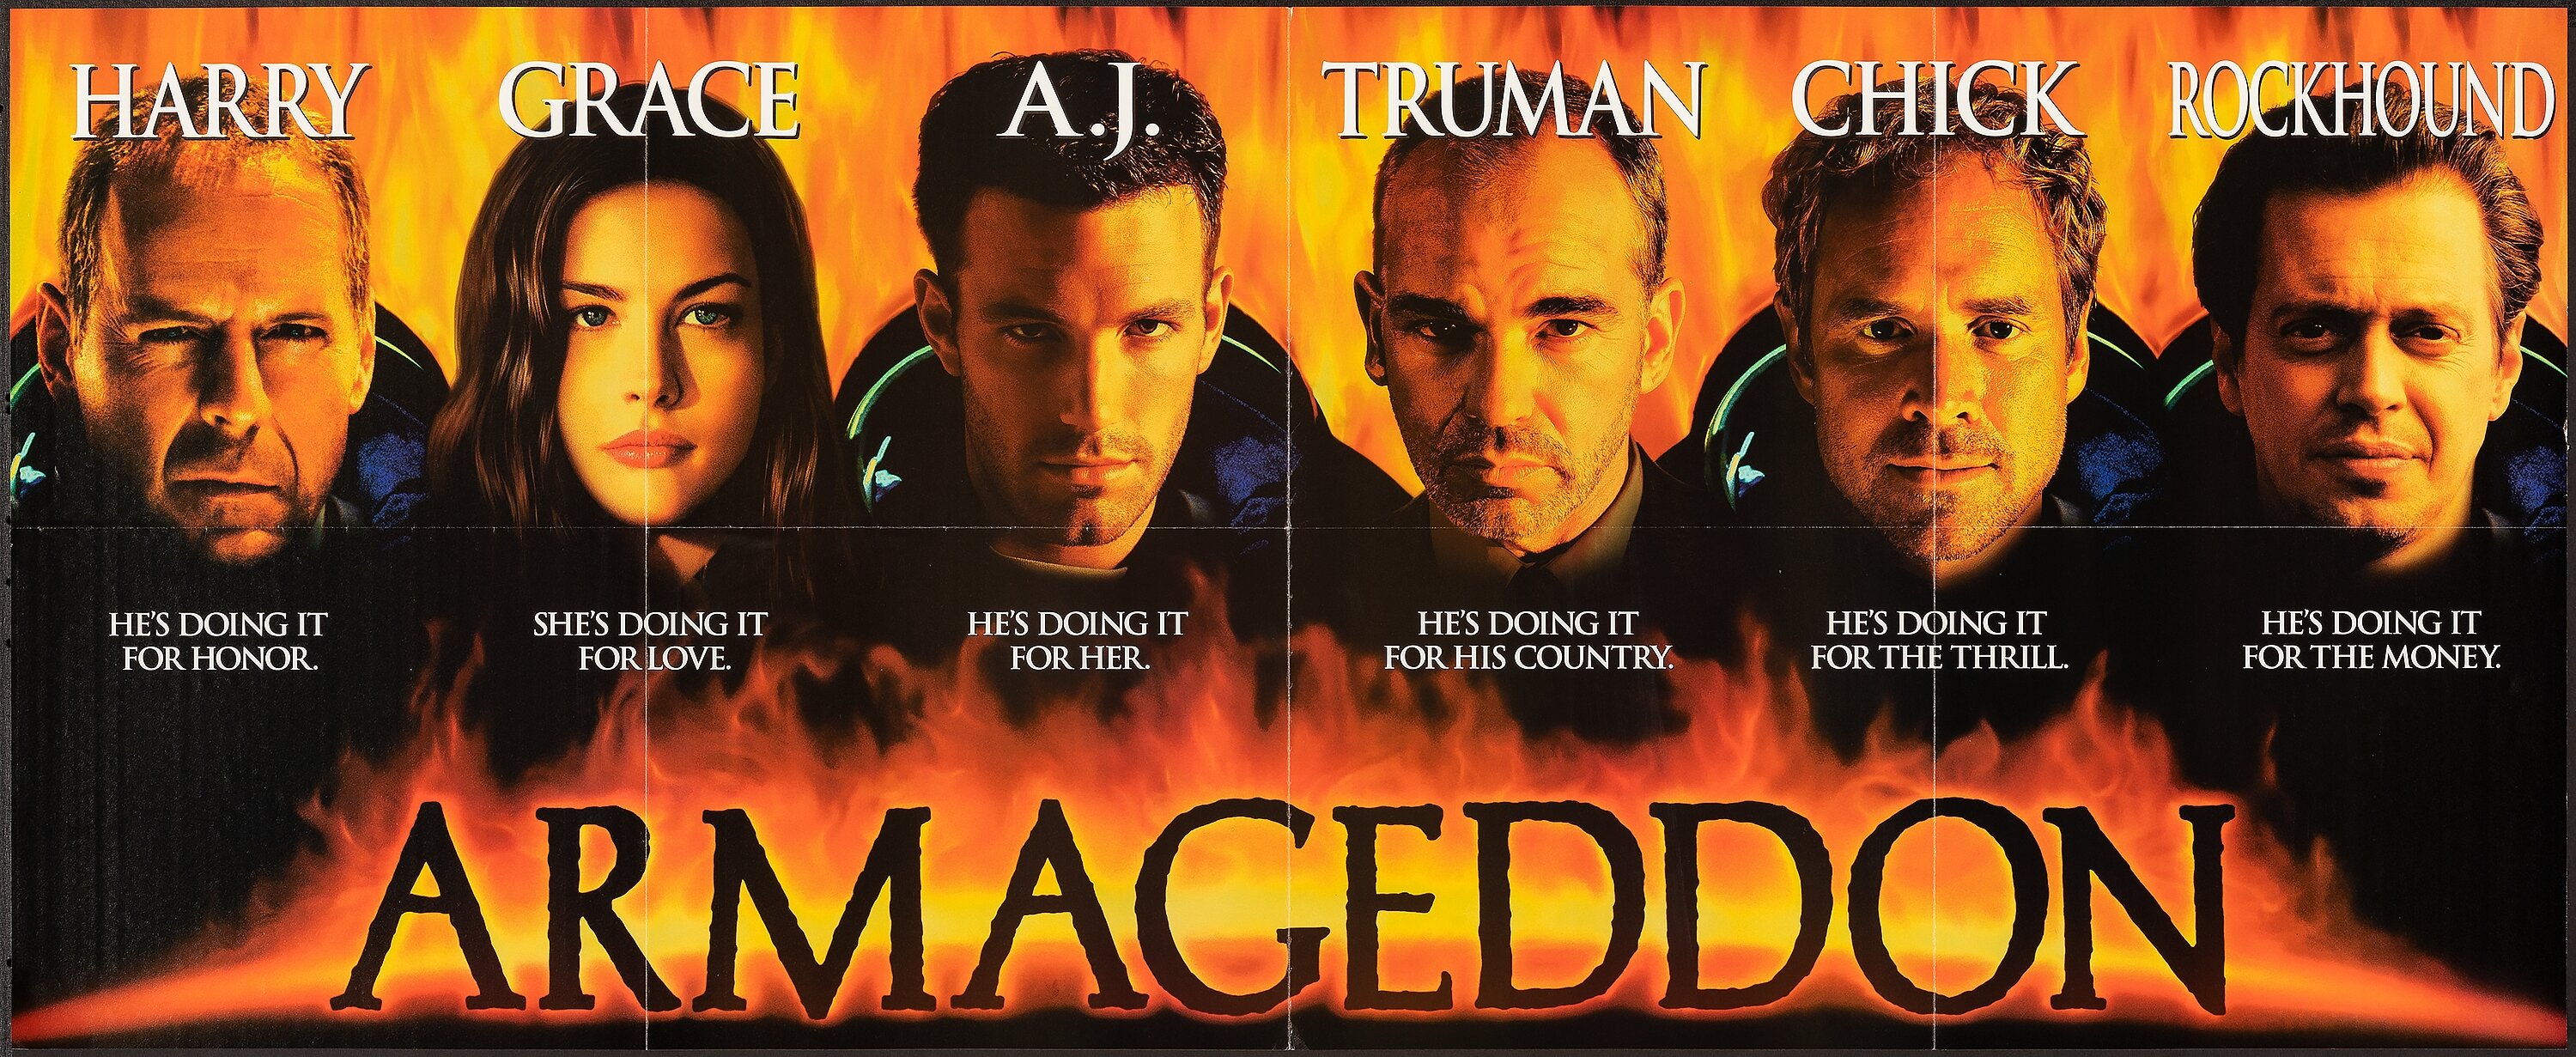 movie posters 1998